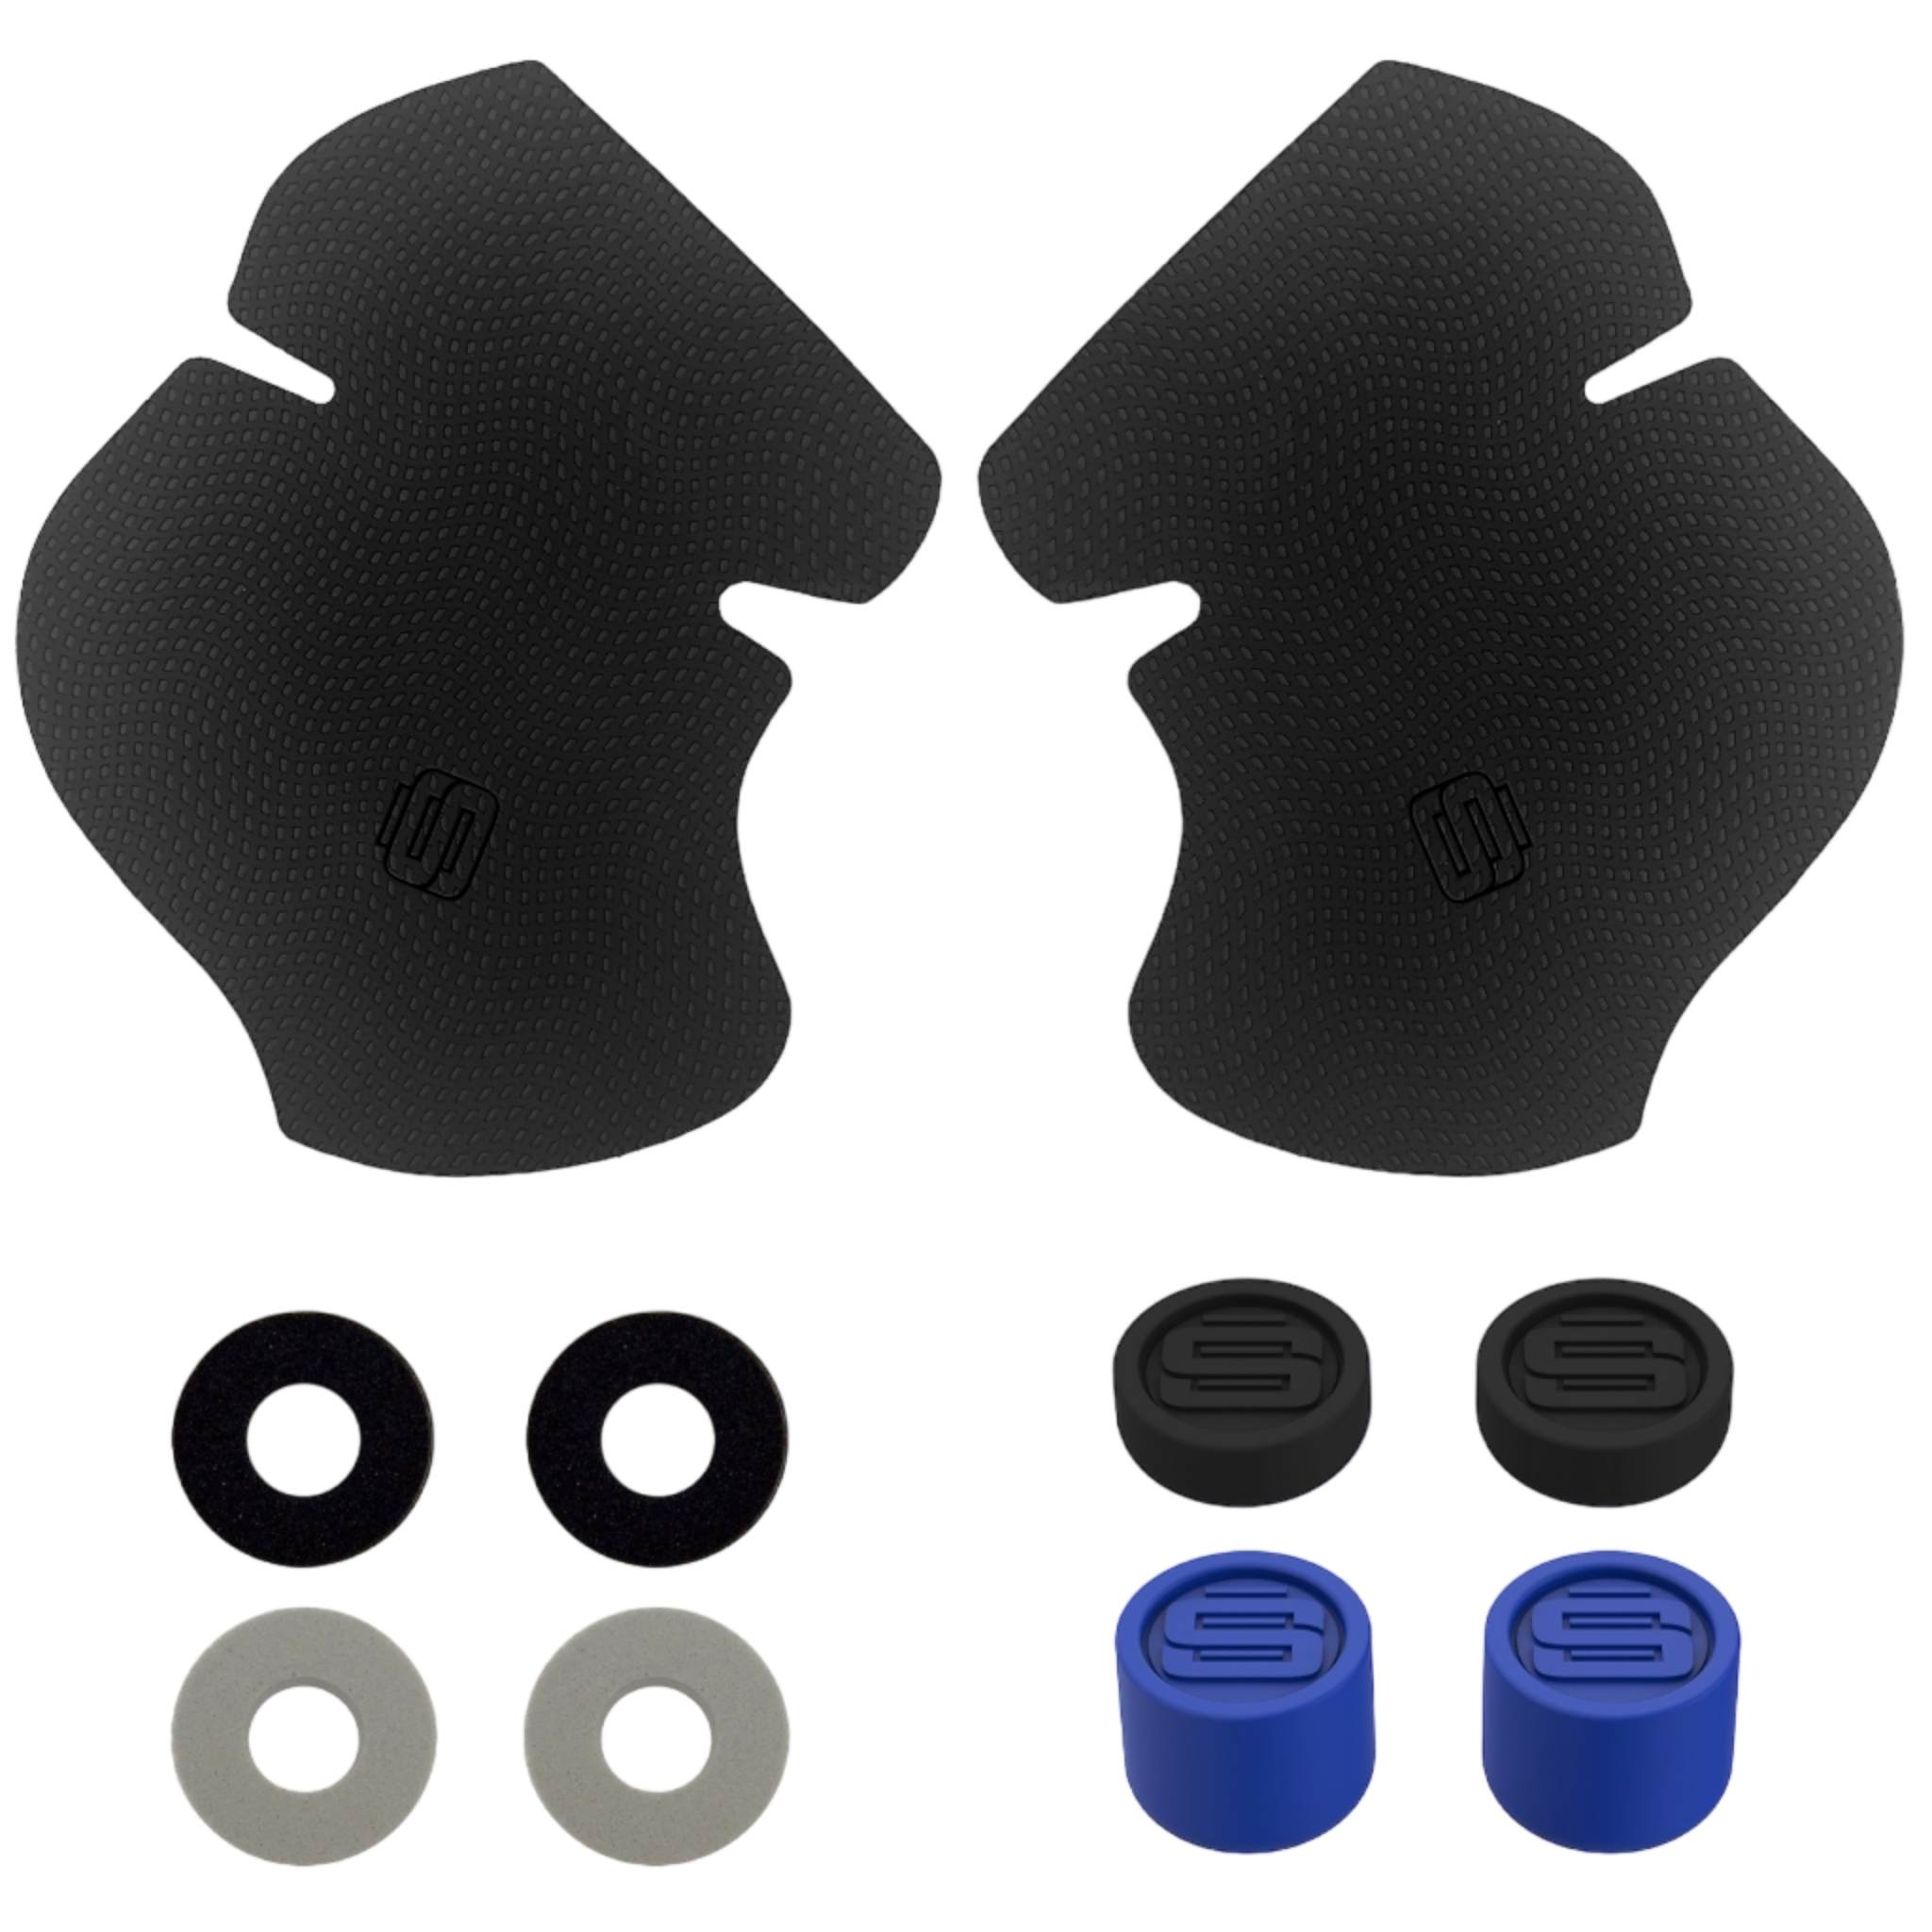 Surge FPS Grip Kit with Precision Aiming Rings - PlayStation 5 - Pro-Distributing